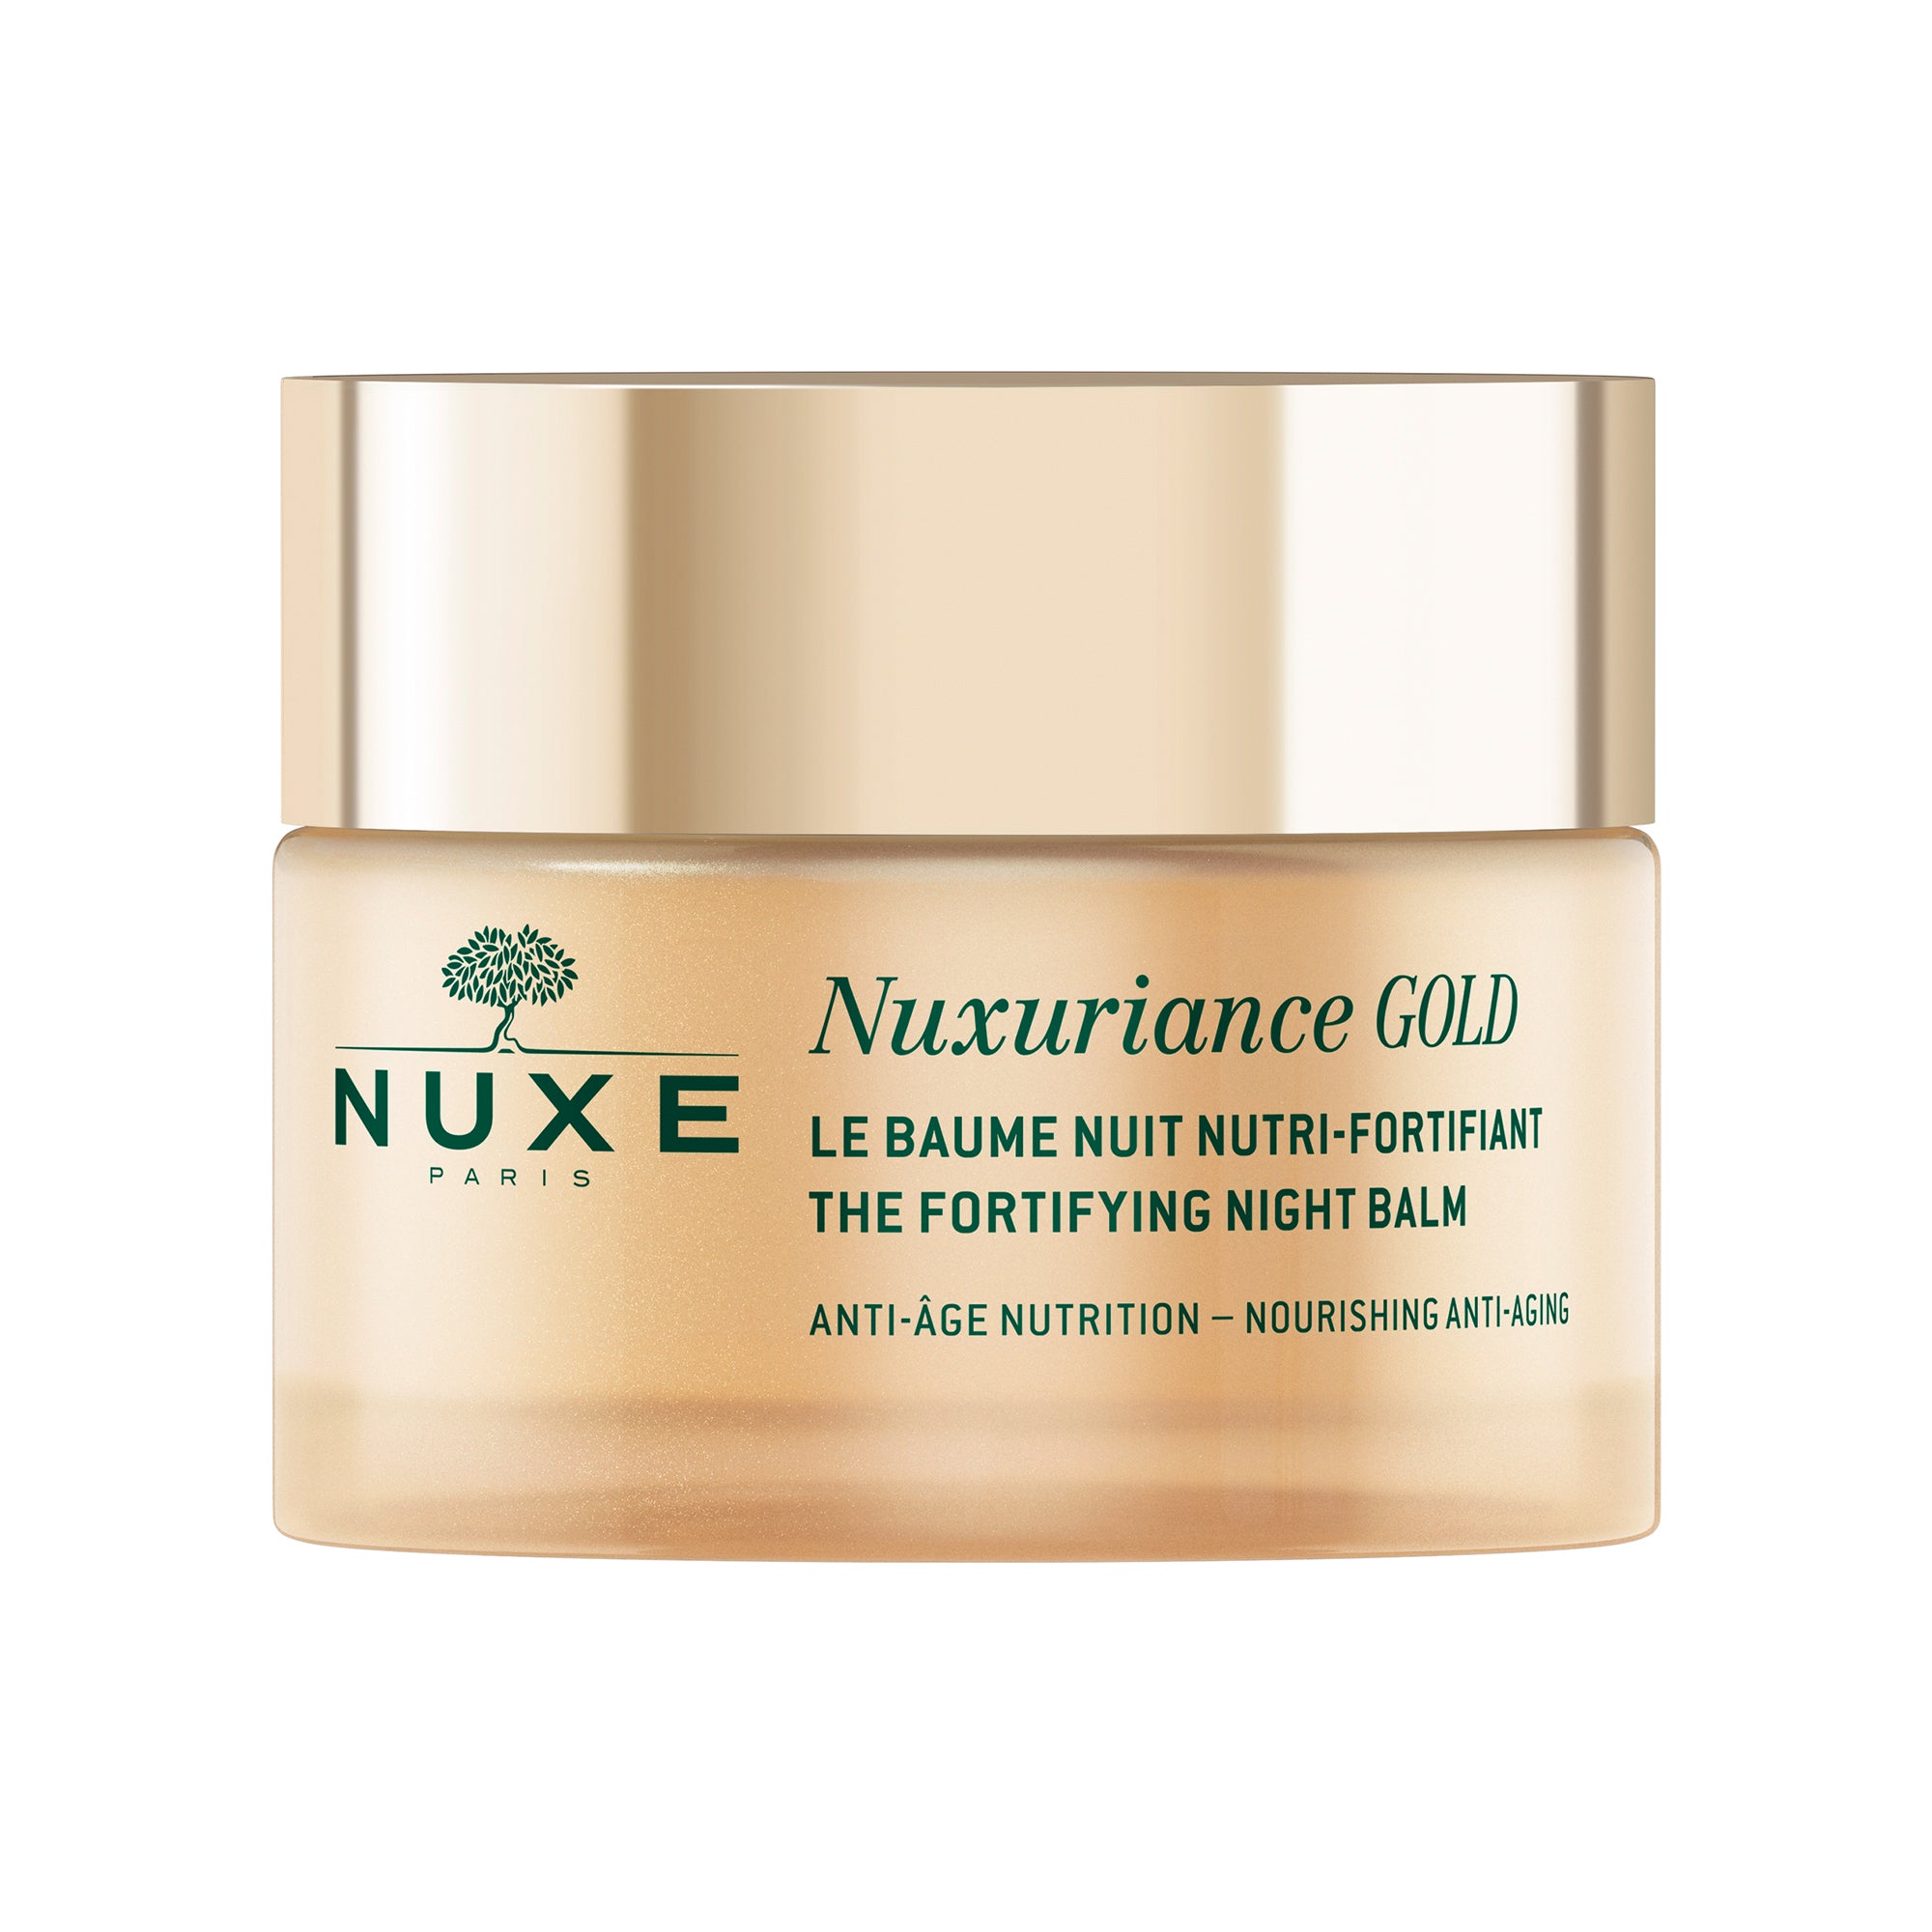 Le Baume Nuit Nutri-Fortifiant